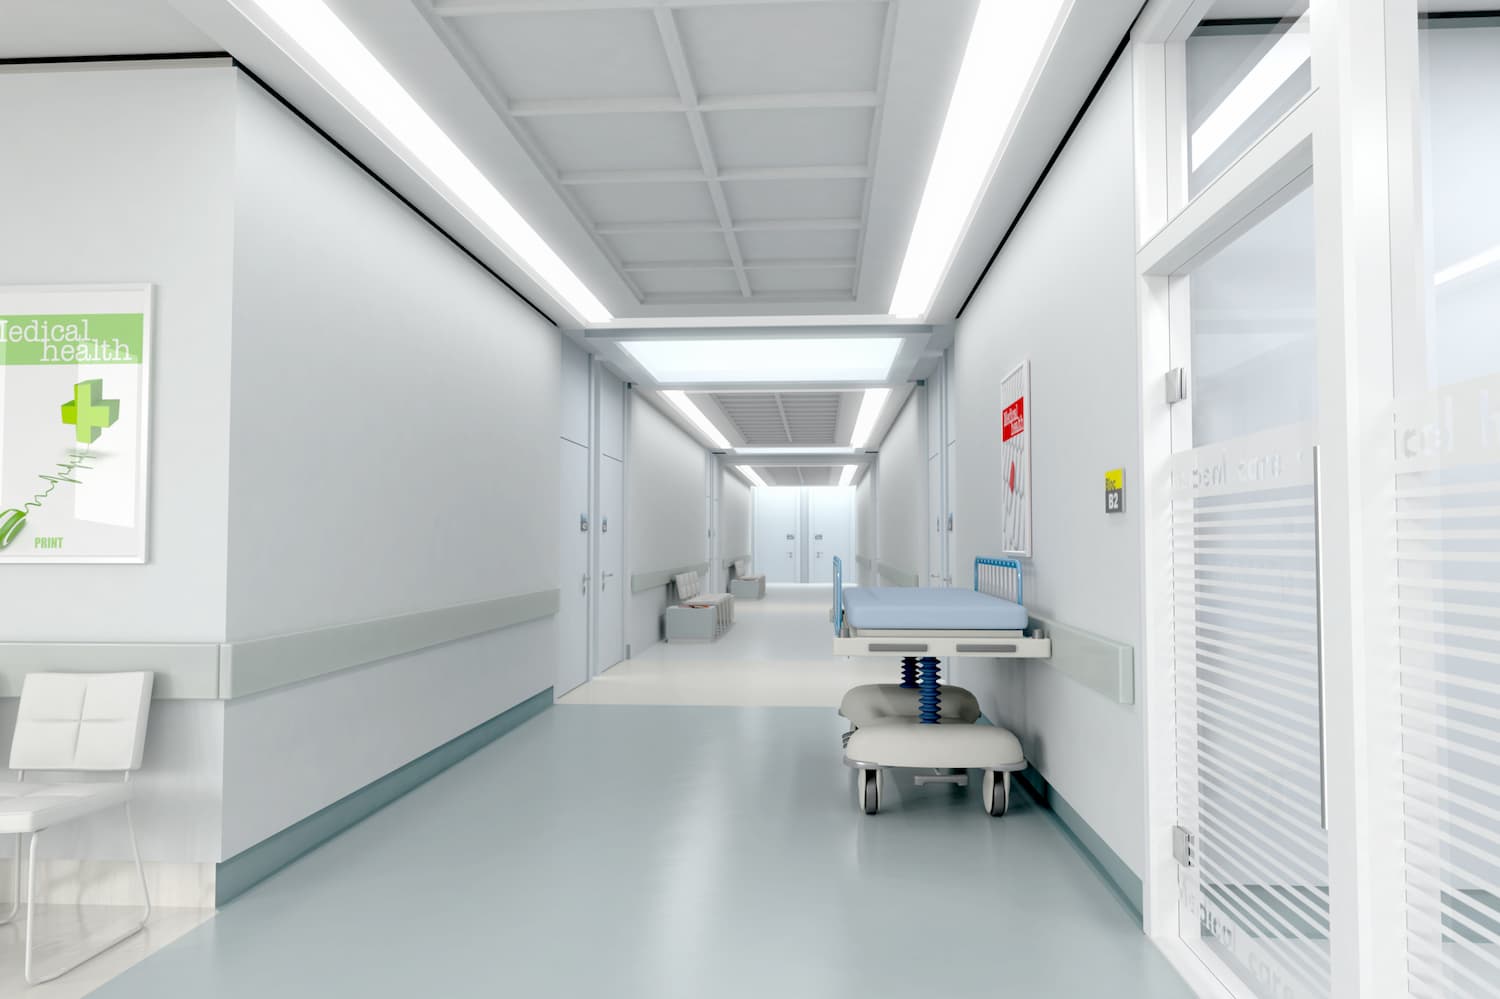 Things to consider before moving your healthcare facility